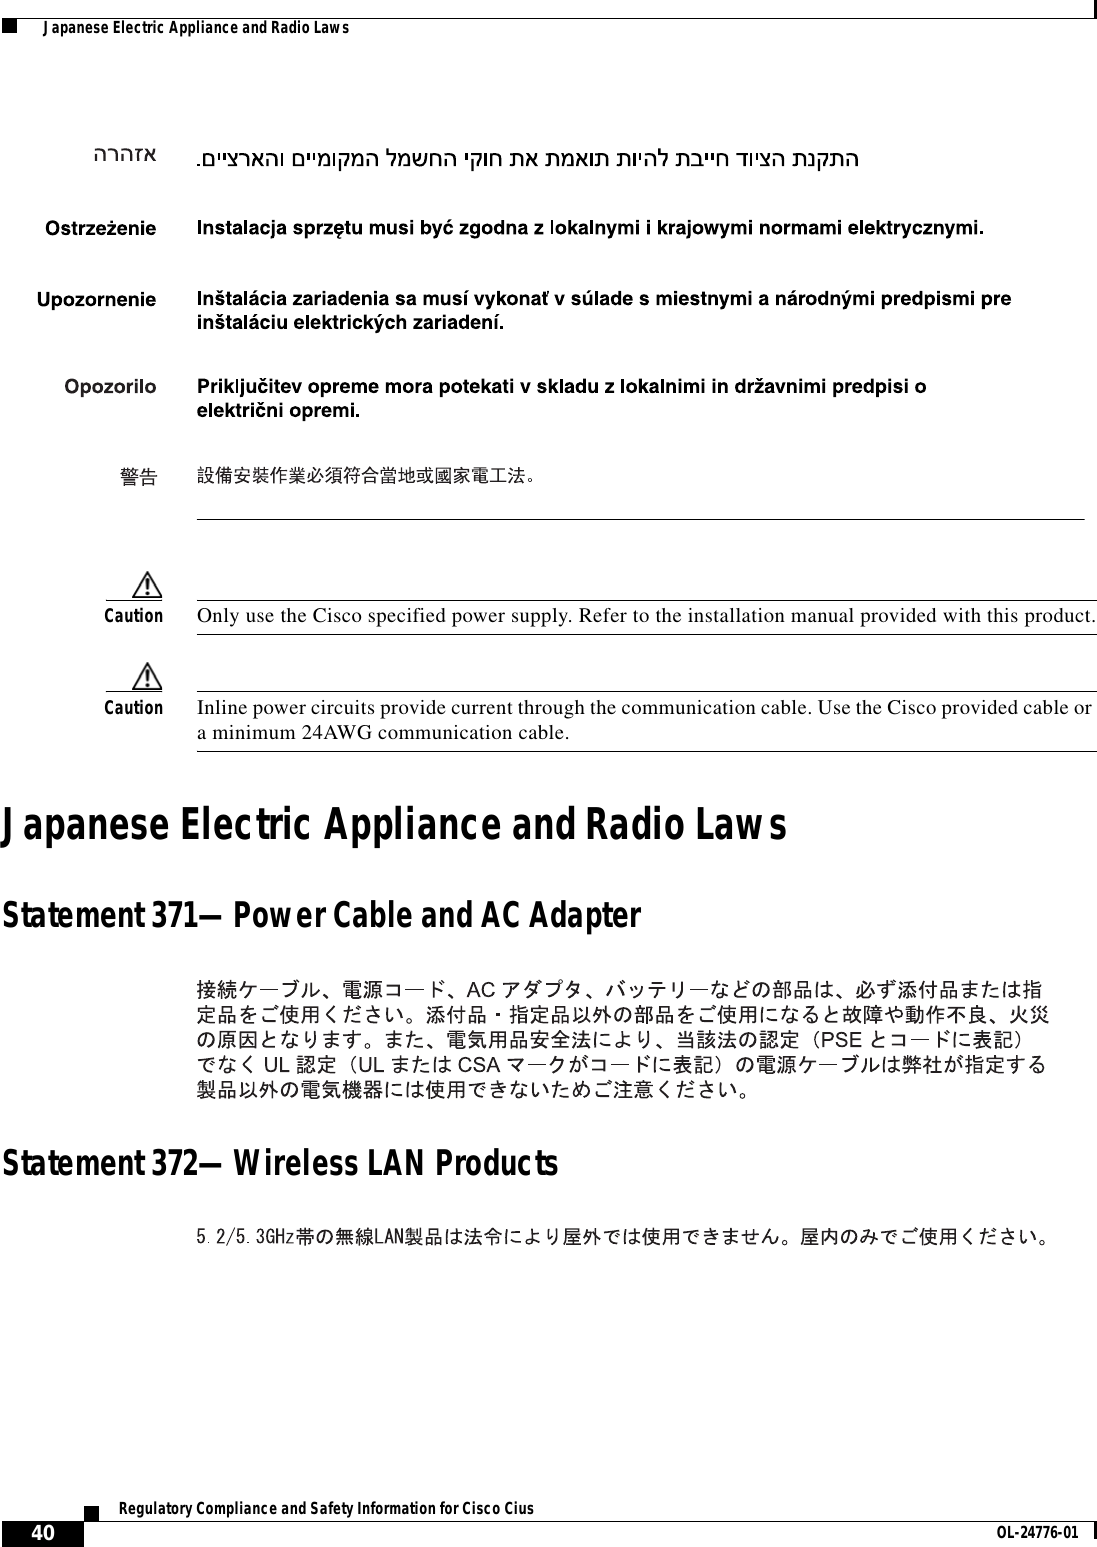  40Regulatory Compliance and Safety Information for Cisco Cius OL-24776-01  Japanese Electric Appliance and Radio LawsCaution Only use the Cisco specified power supply. Refer to the installation manual provided with this product.Caution Inline power circuits provide current through the communication cable. Use the Cisco provided cable or a minimum 24AWG communication cable. Japanese Electric Appliance and Radio LawsStatement 371—Power Cable and AC AdapterStatement 372—Wireless LAN Products